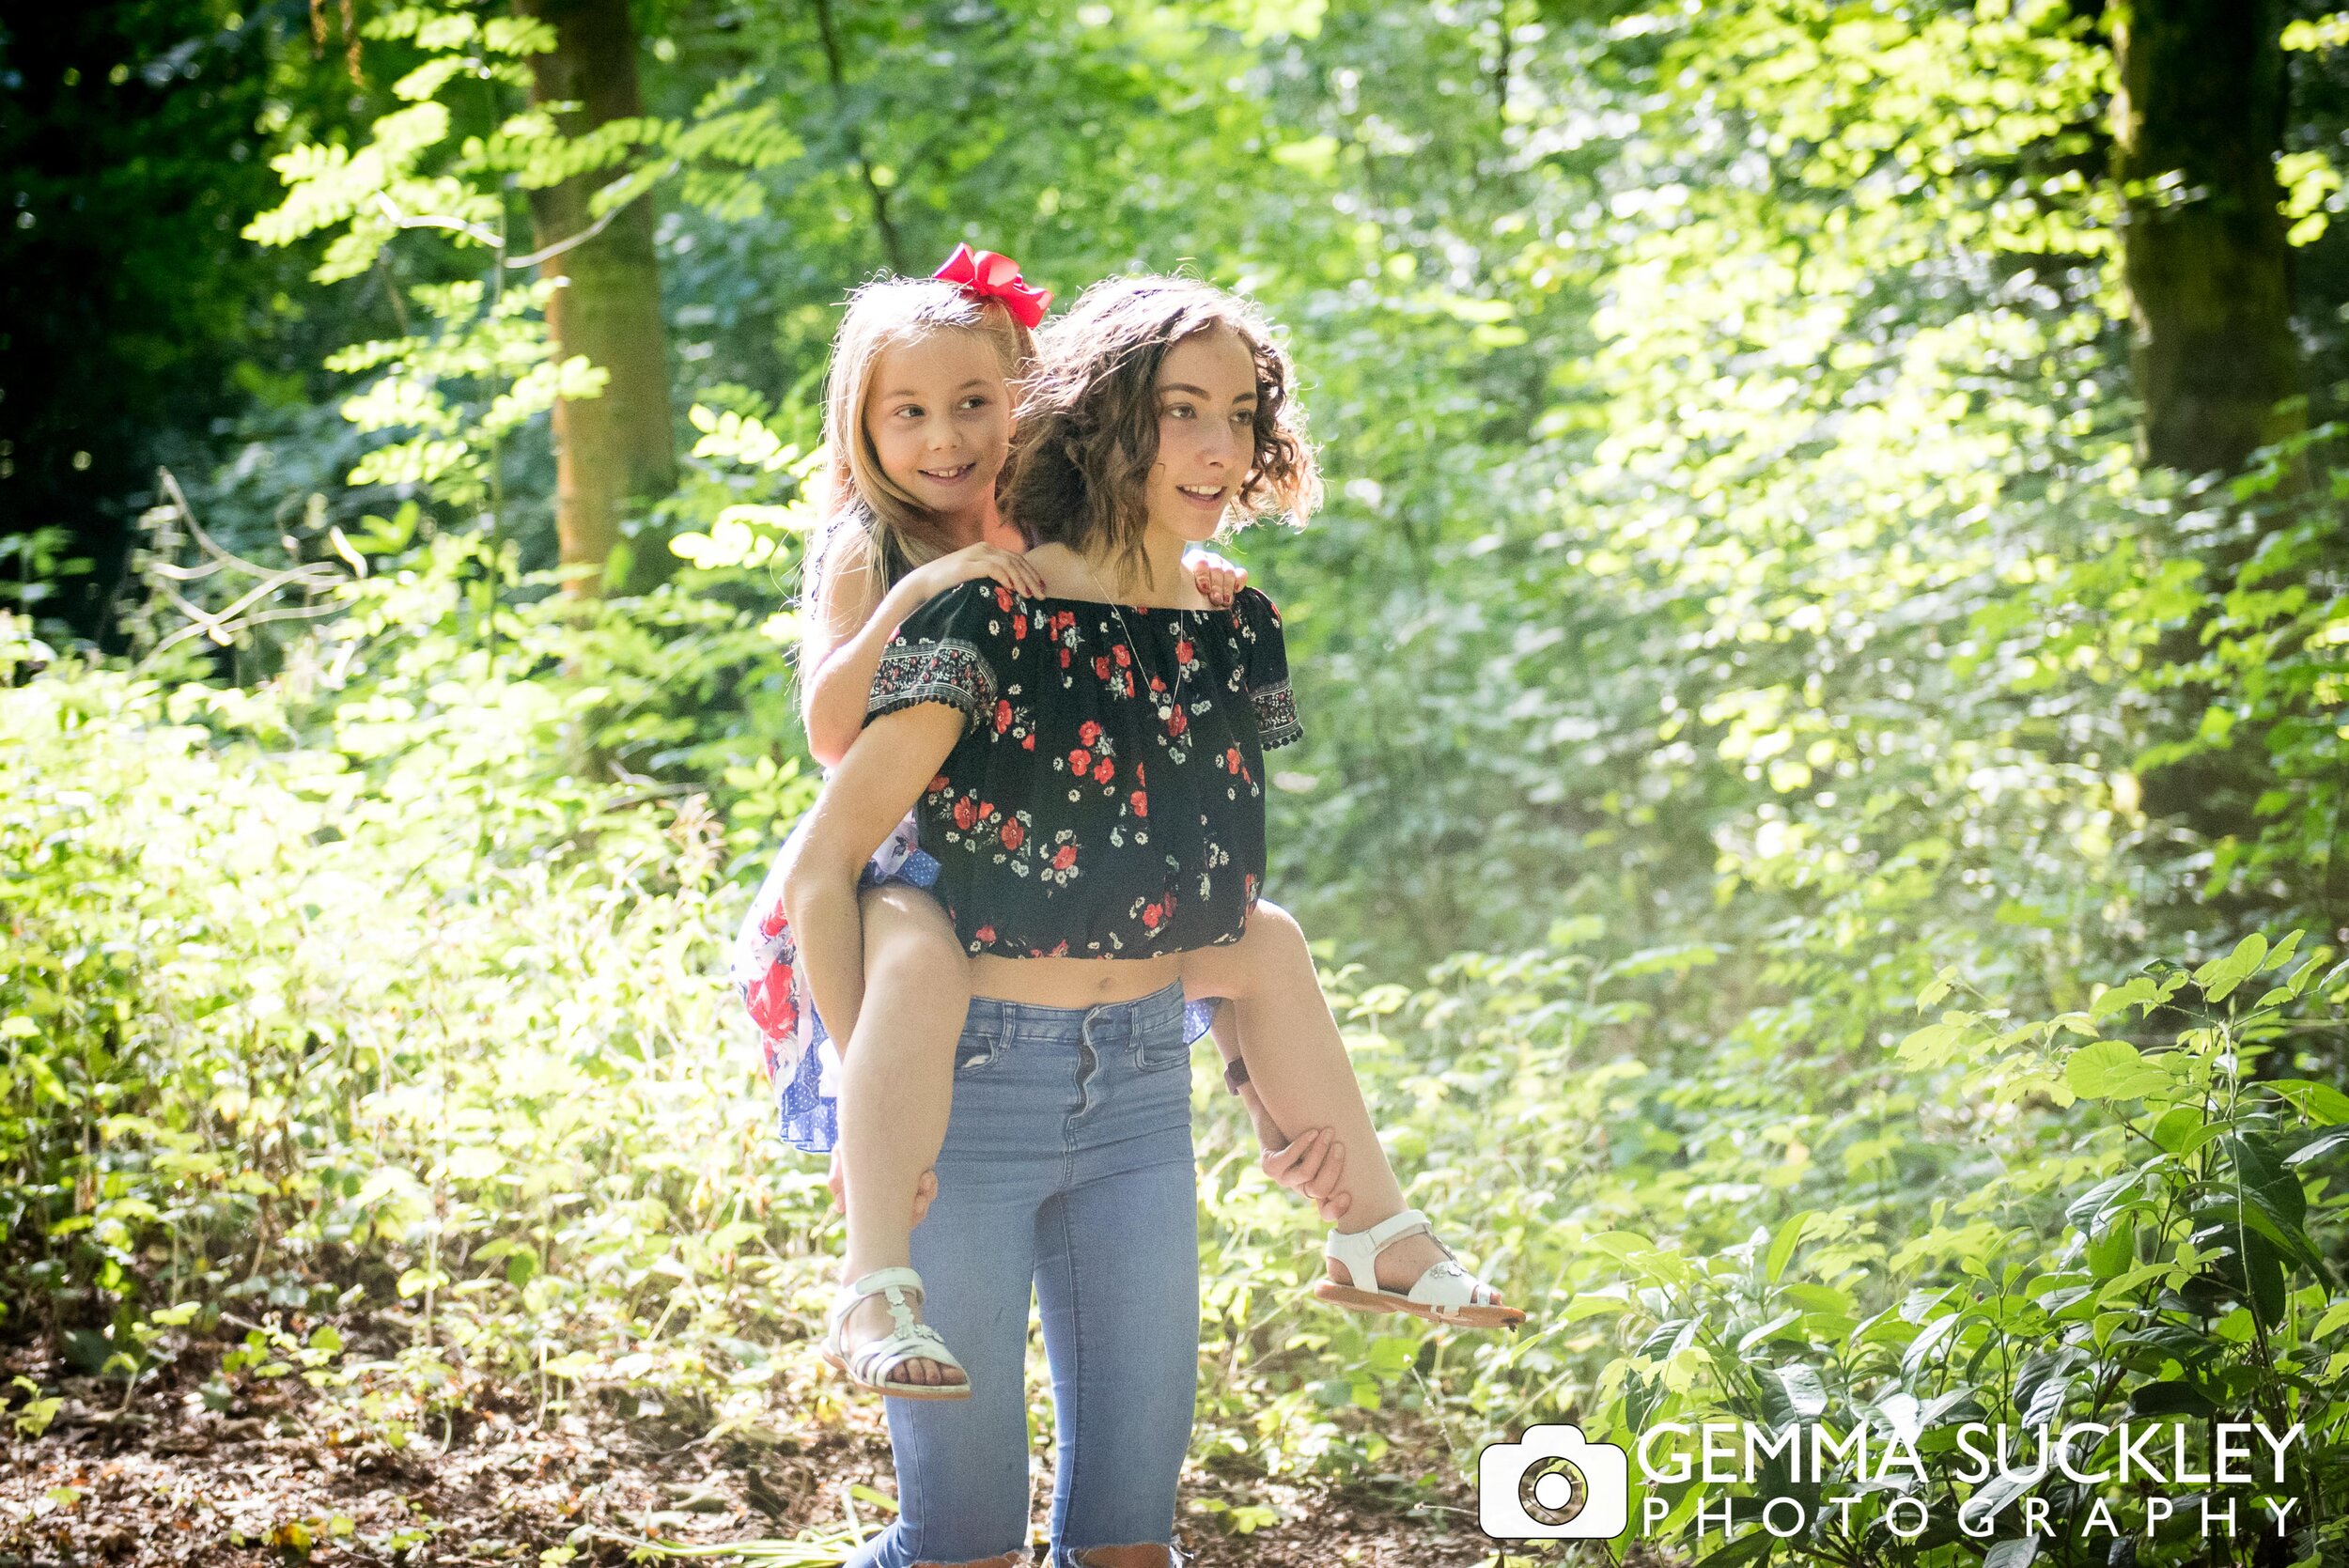 a young girl piggybacking her little sister